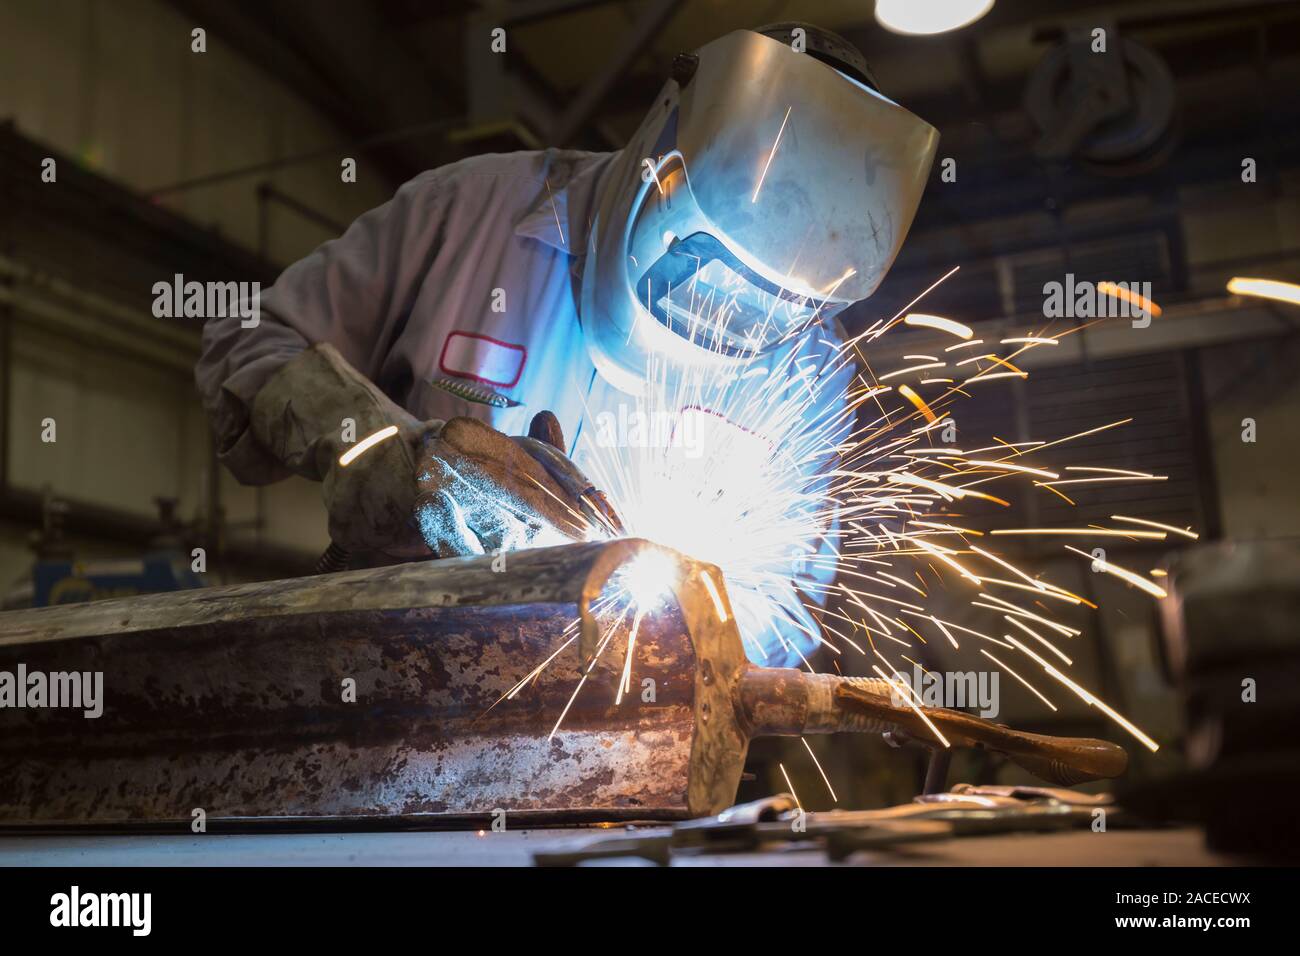 Man welding with sparks flying Stock Photo